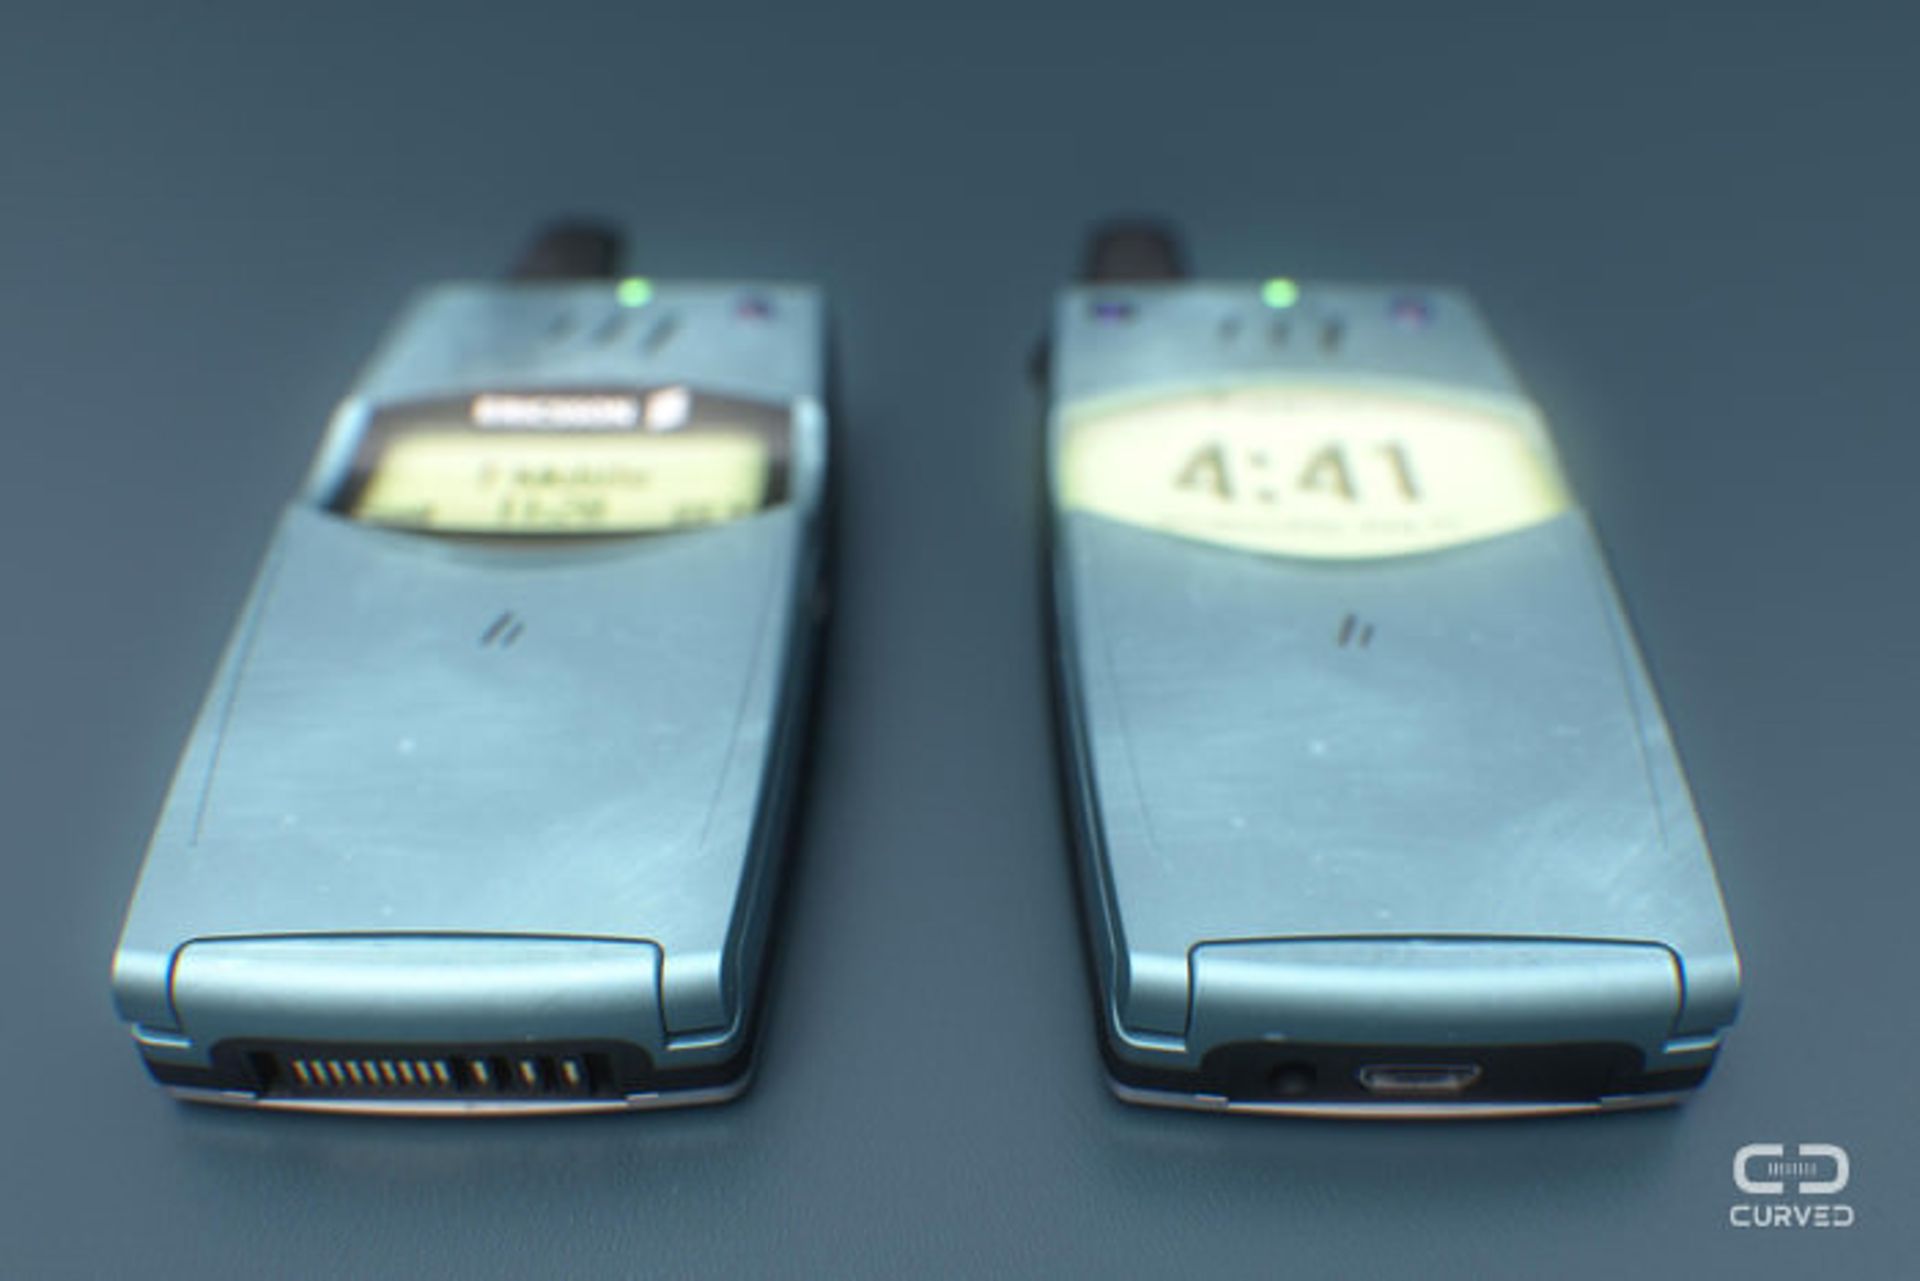 What-if-featurephones-were-smart 19